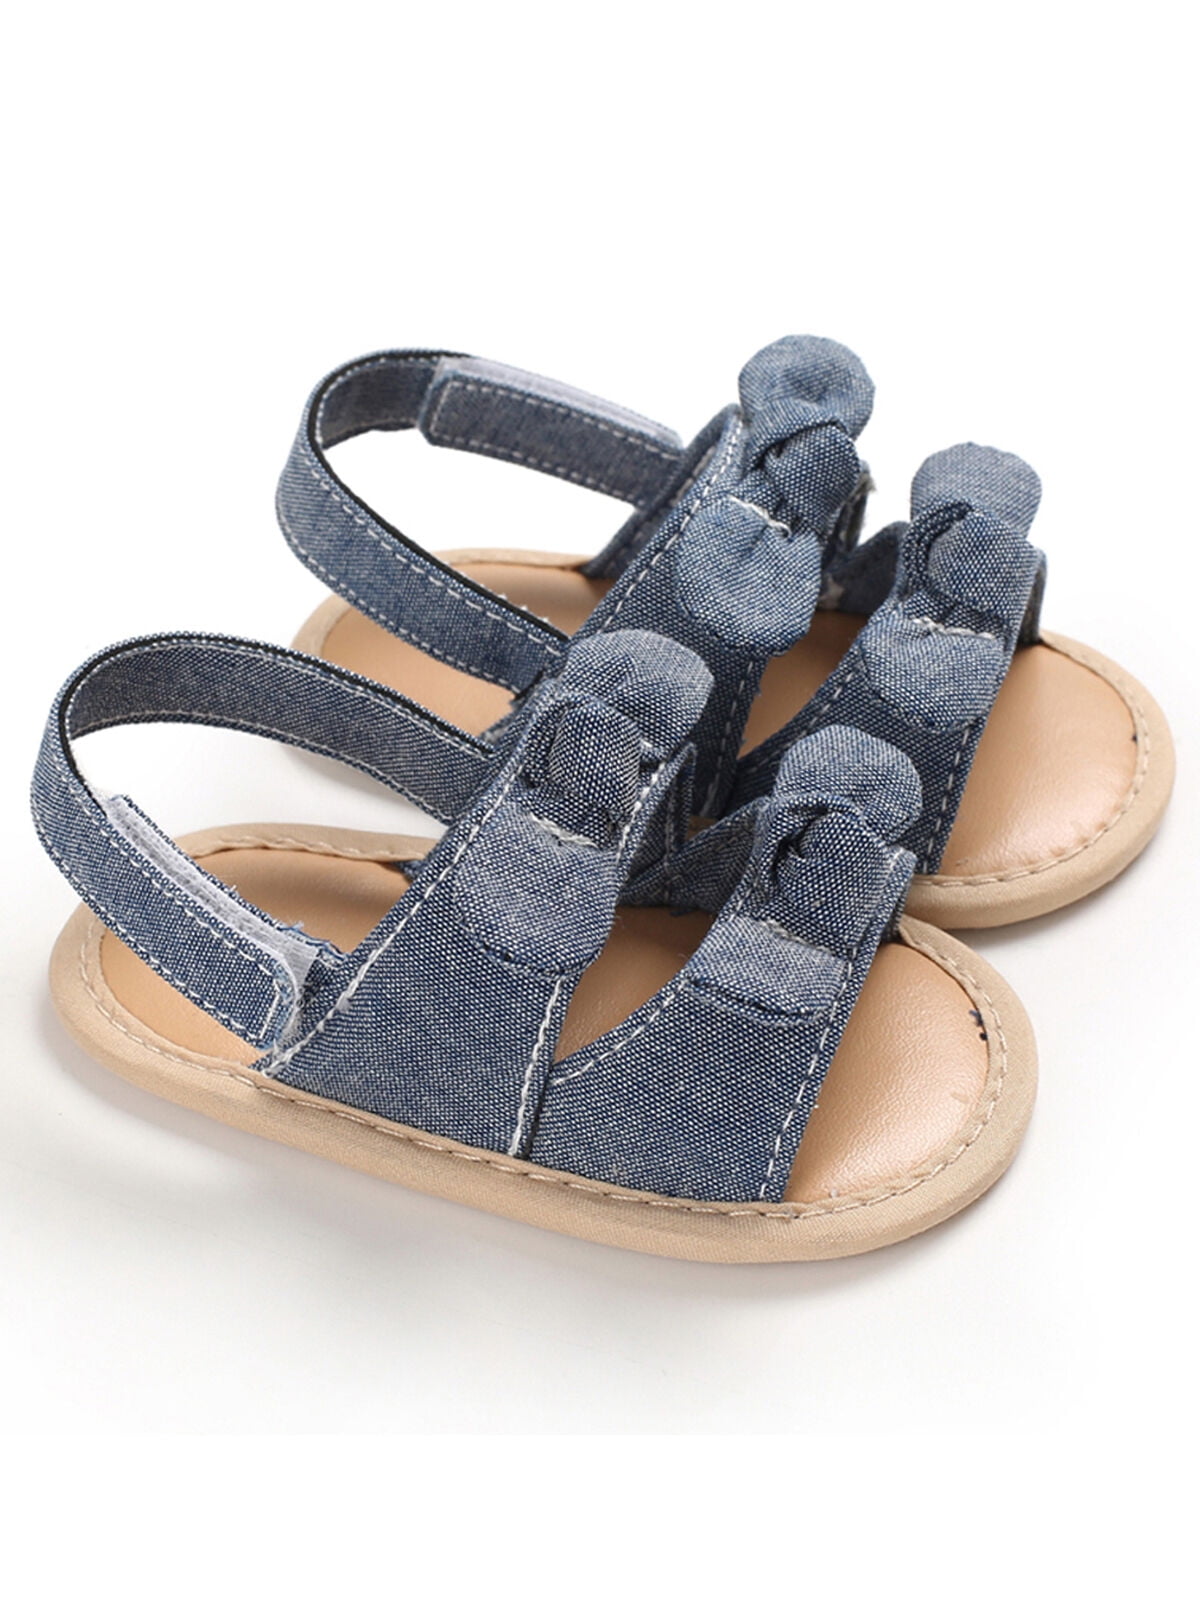 Fashion Infant Baby Girl Soft Sole Sandals Toddler Summer Shoes Bow-Knot Sandal 